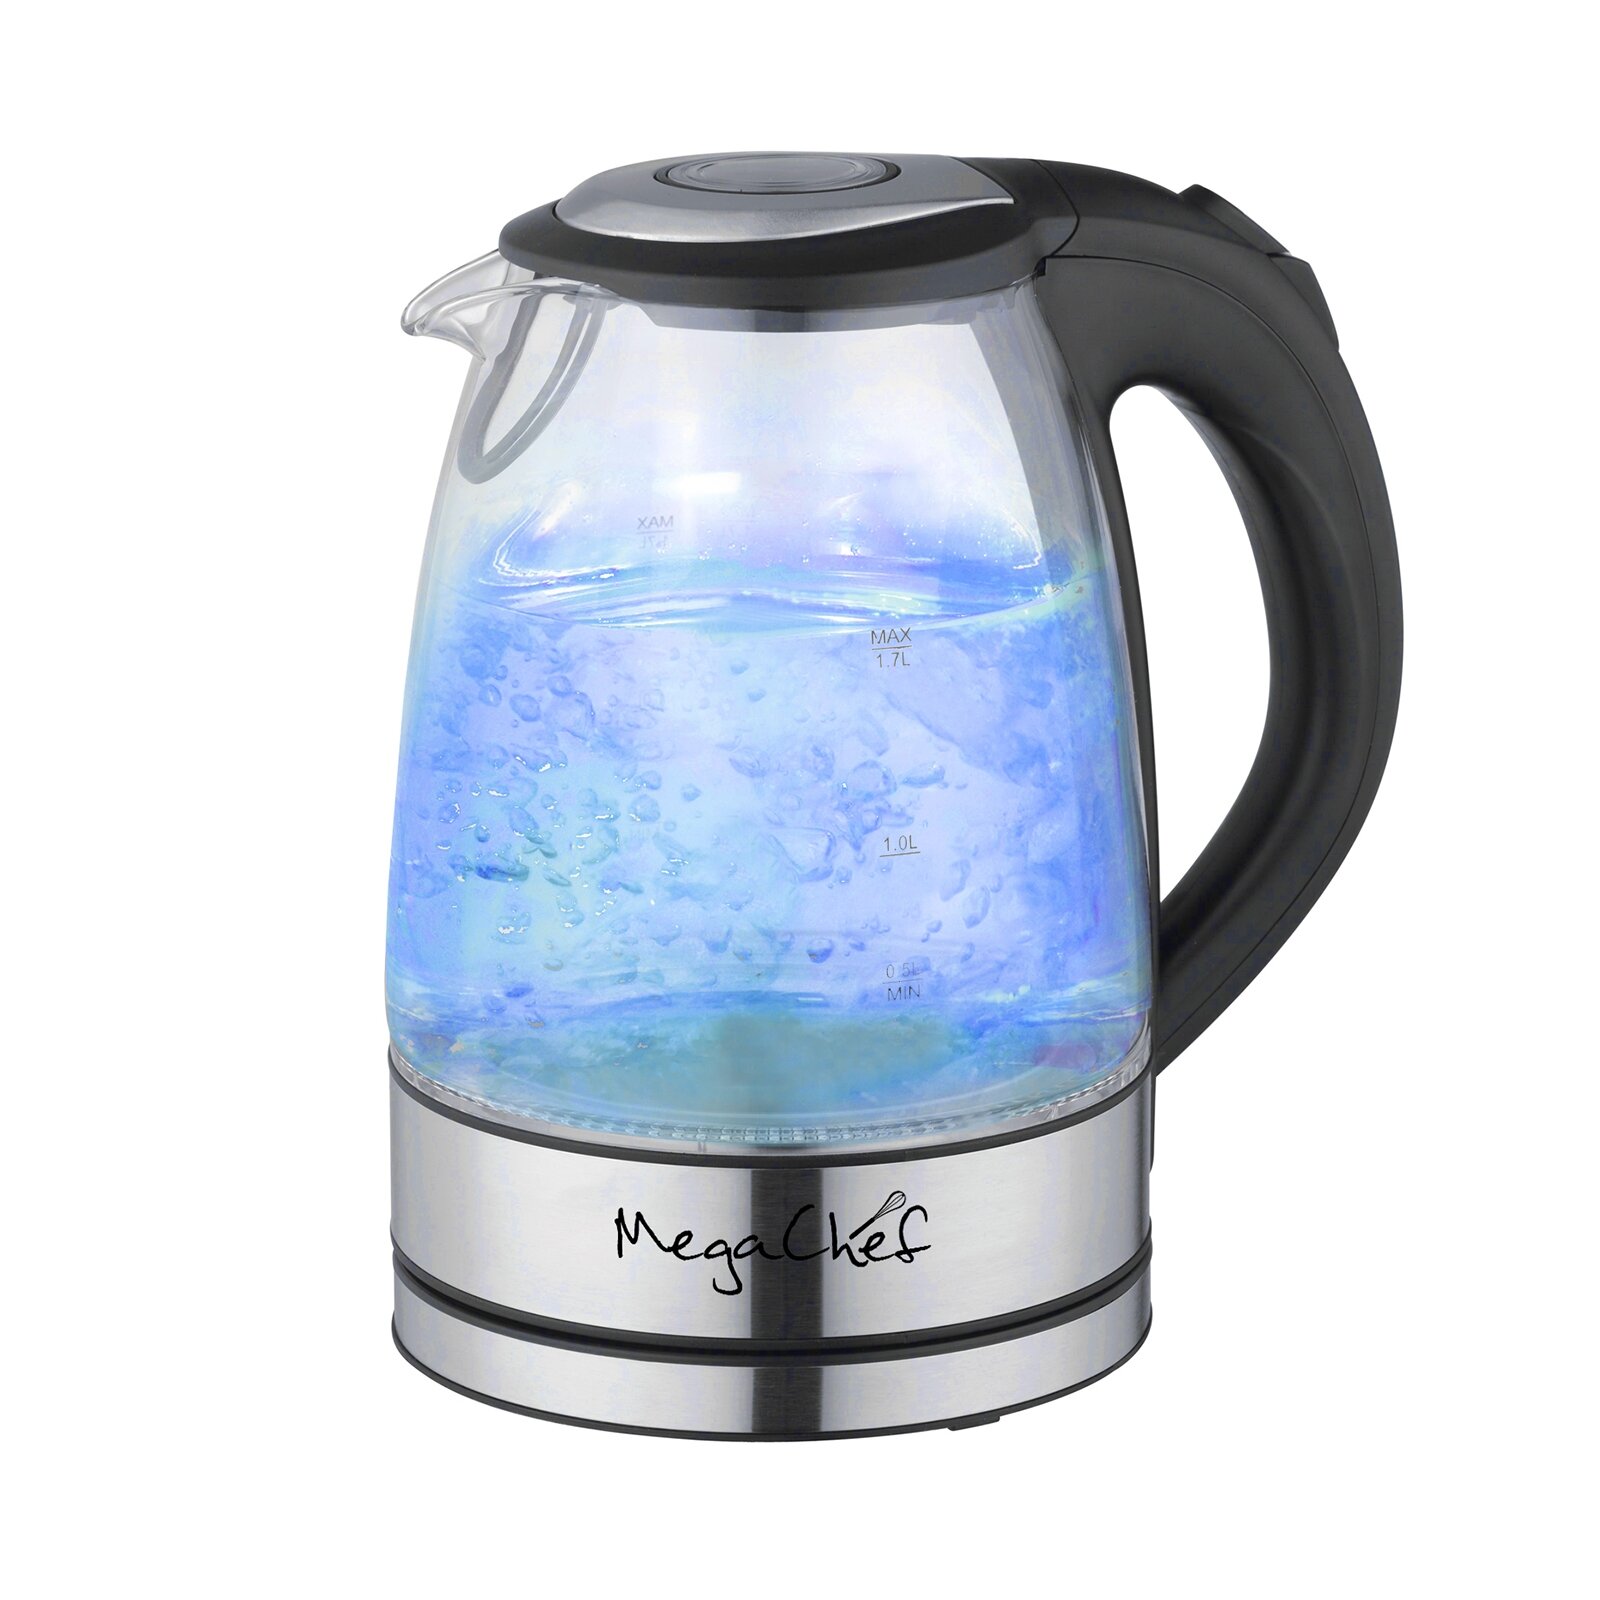 Chefman Glass Electric Kettle for Boiling Water, 1.8L 1500W, with Tea  Infuser, Keep Warm Function, Auto Shut Off, Boil-Dry Protection, BPA Free,  Hot